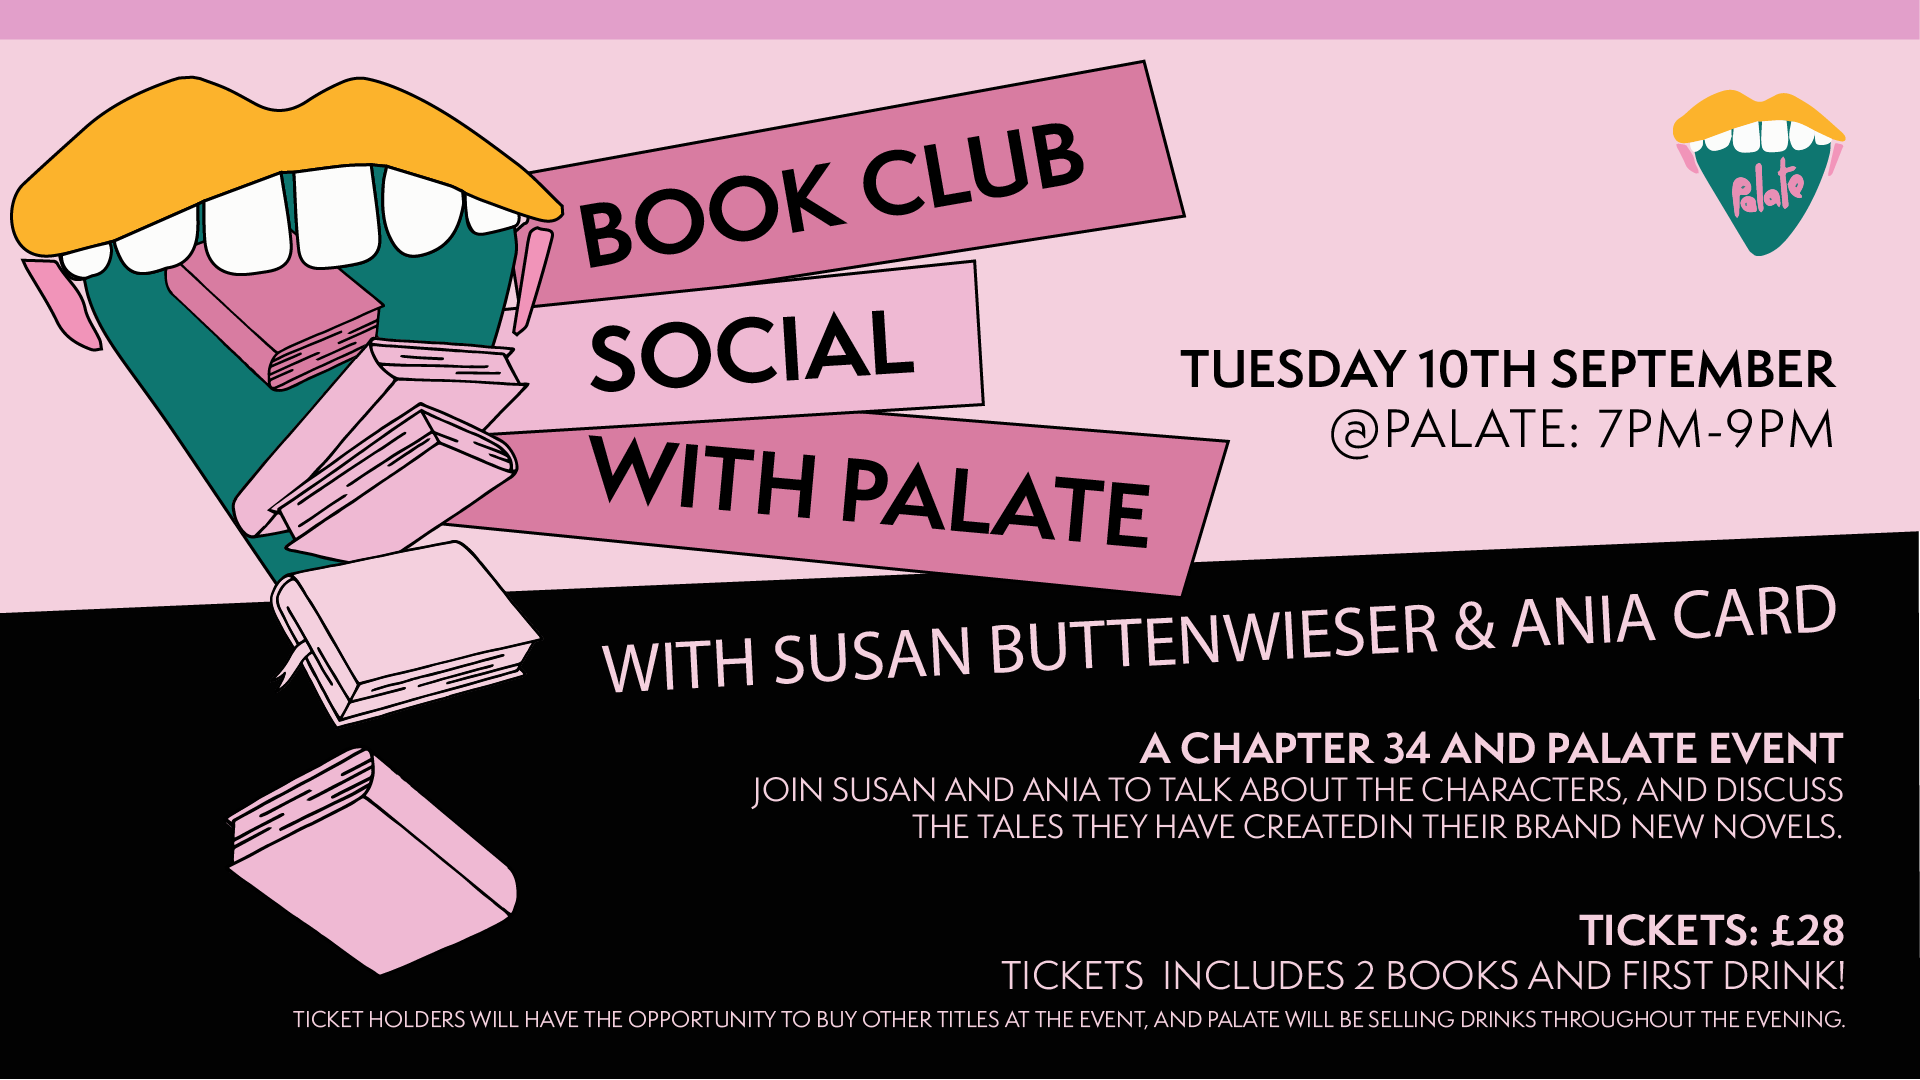 BOOK CLUB SOCIAL WITH PALATE - YEAR 1 EVENT!